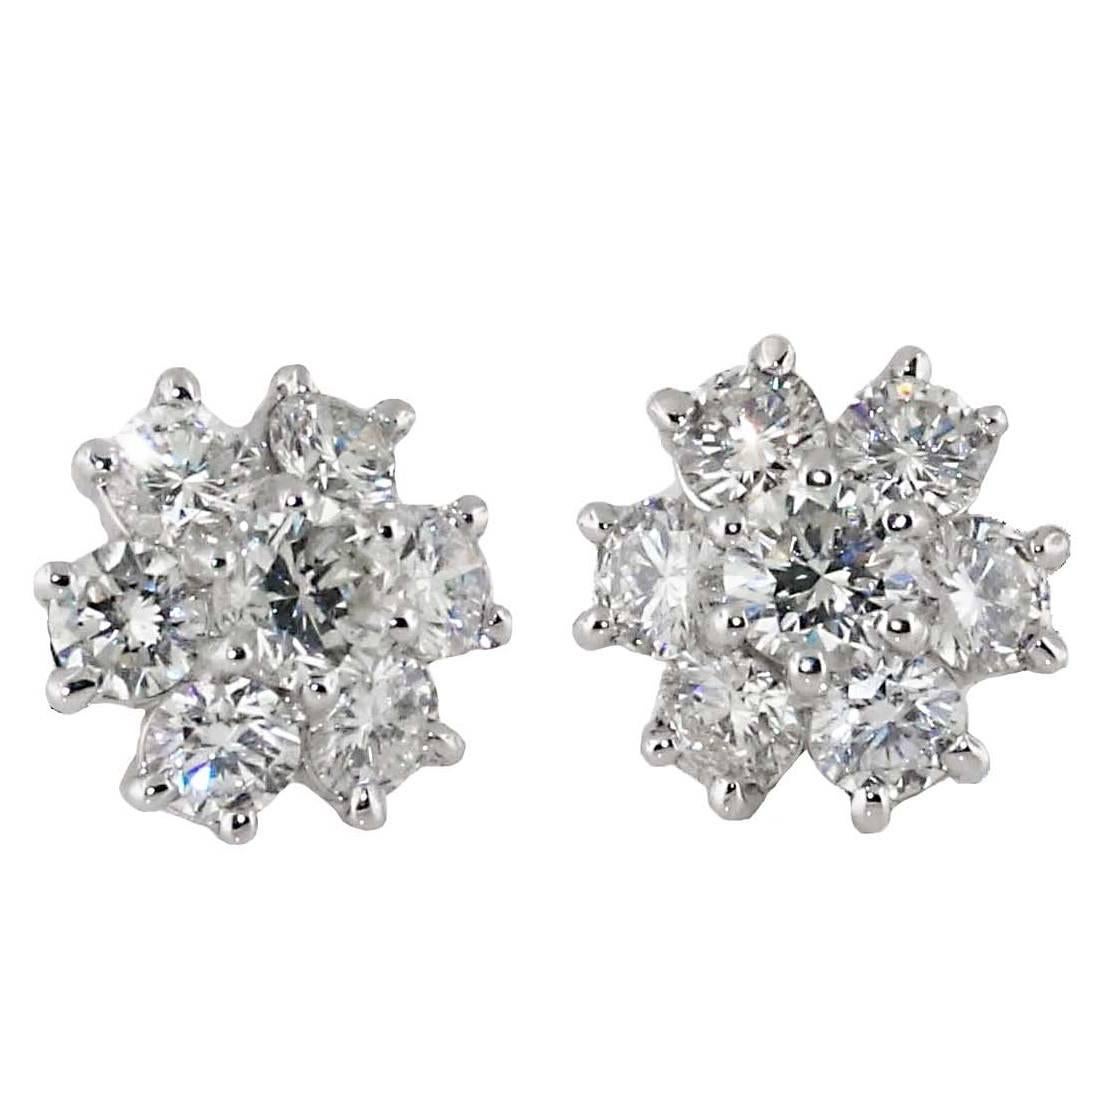 Diamond Cluster Earrings Approximatly 4 carats total